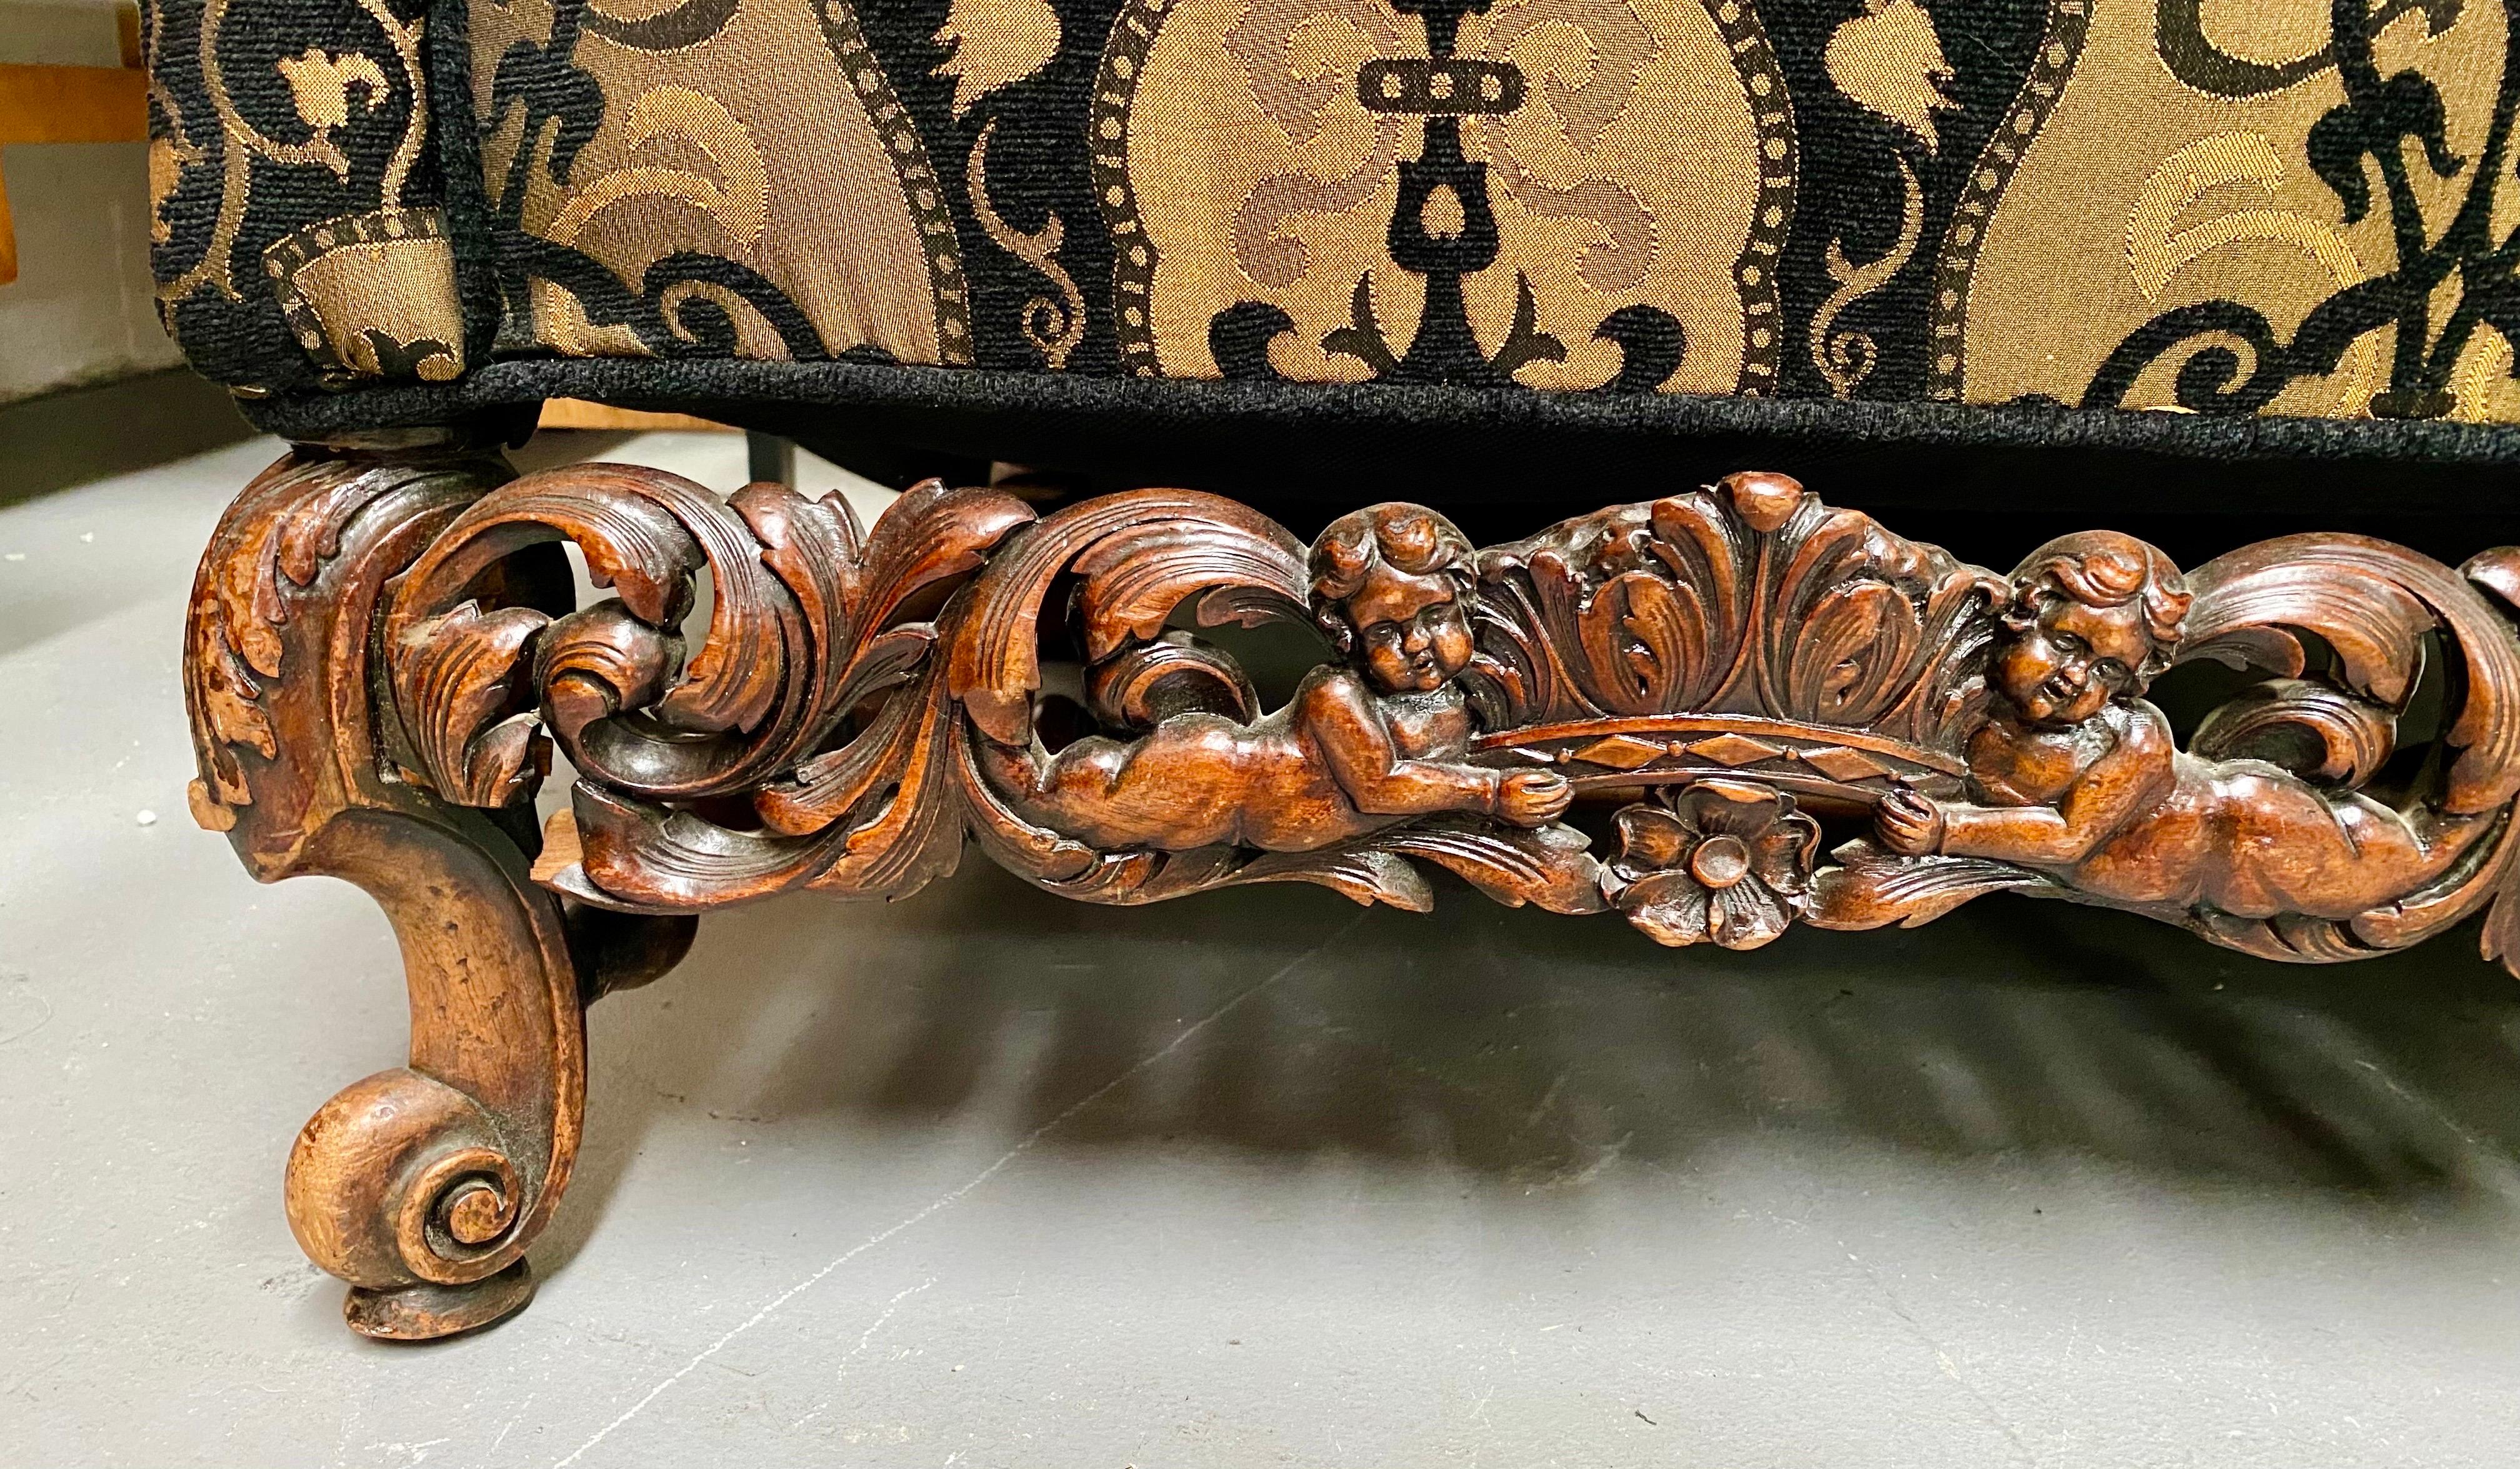 Italian Rococo Revival Style Settee or Sofa with Heraldic Motif in Black & Beige For Sale 2